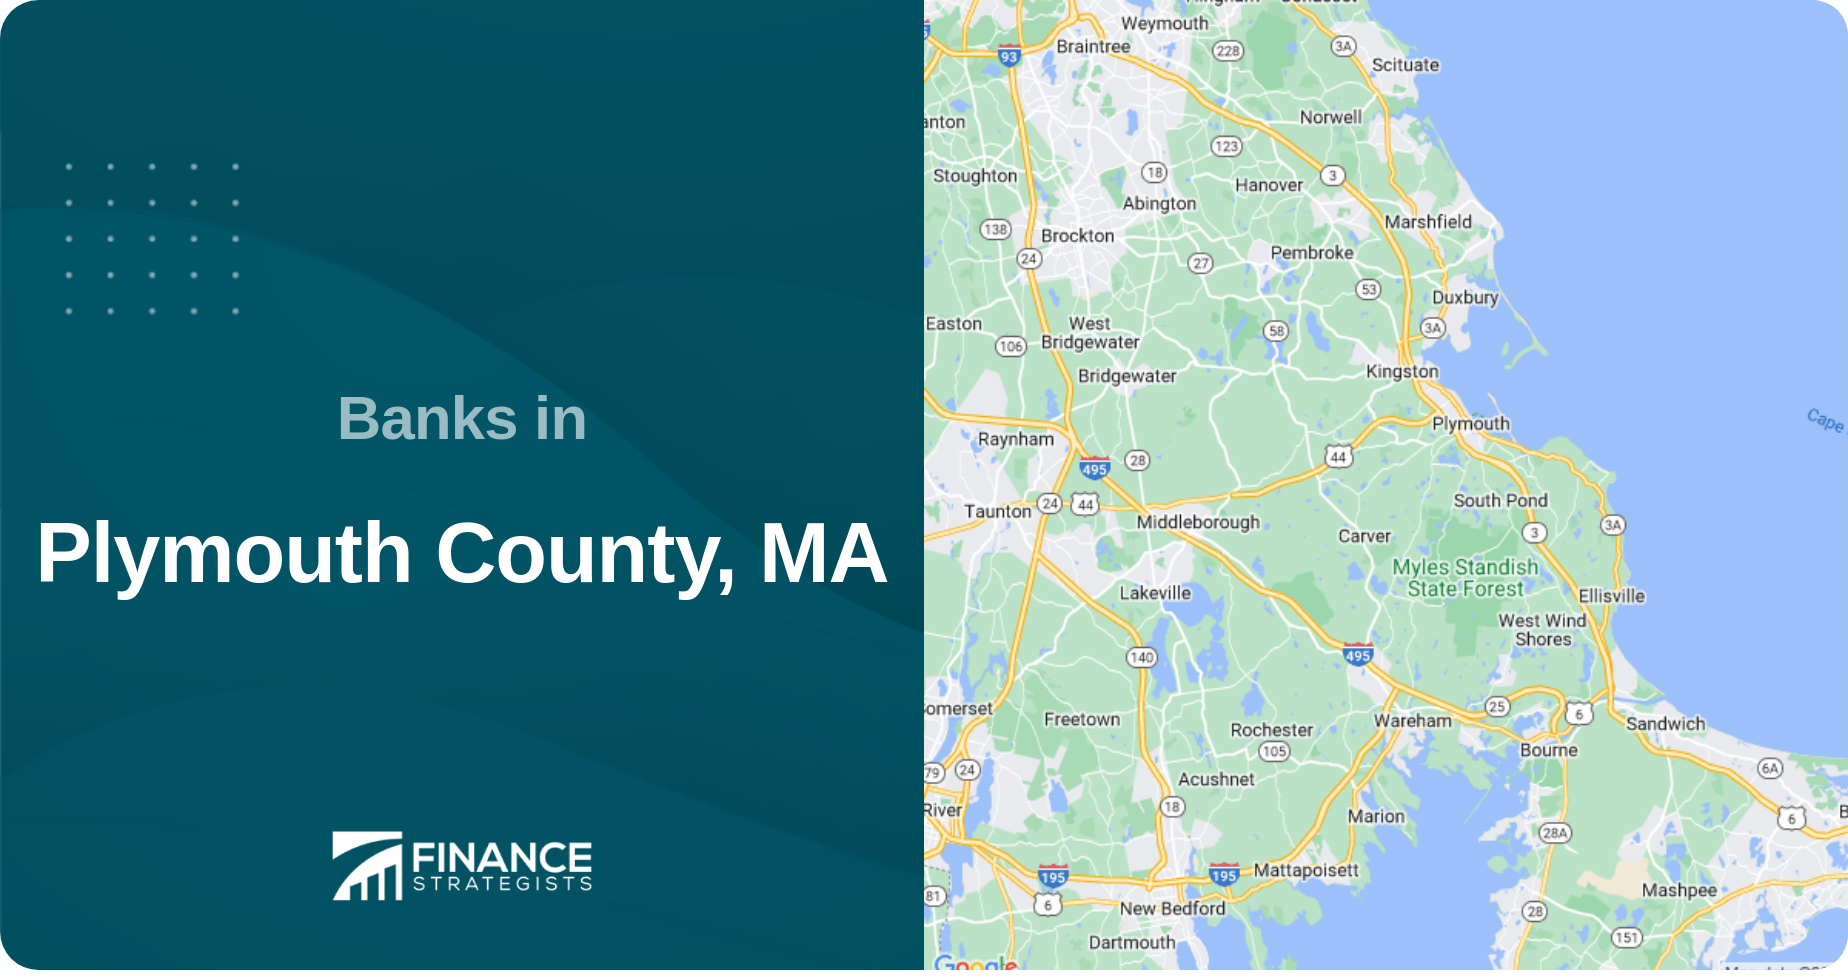 Banks in Plymouth County, MA